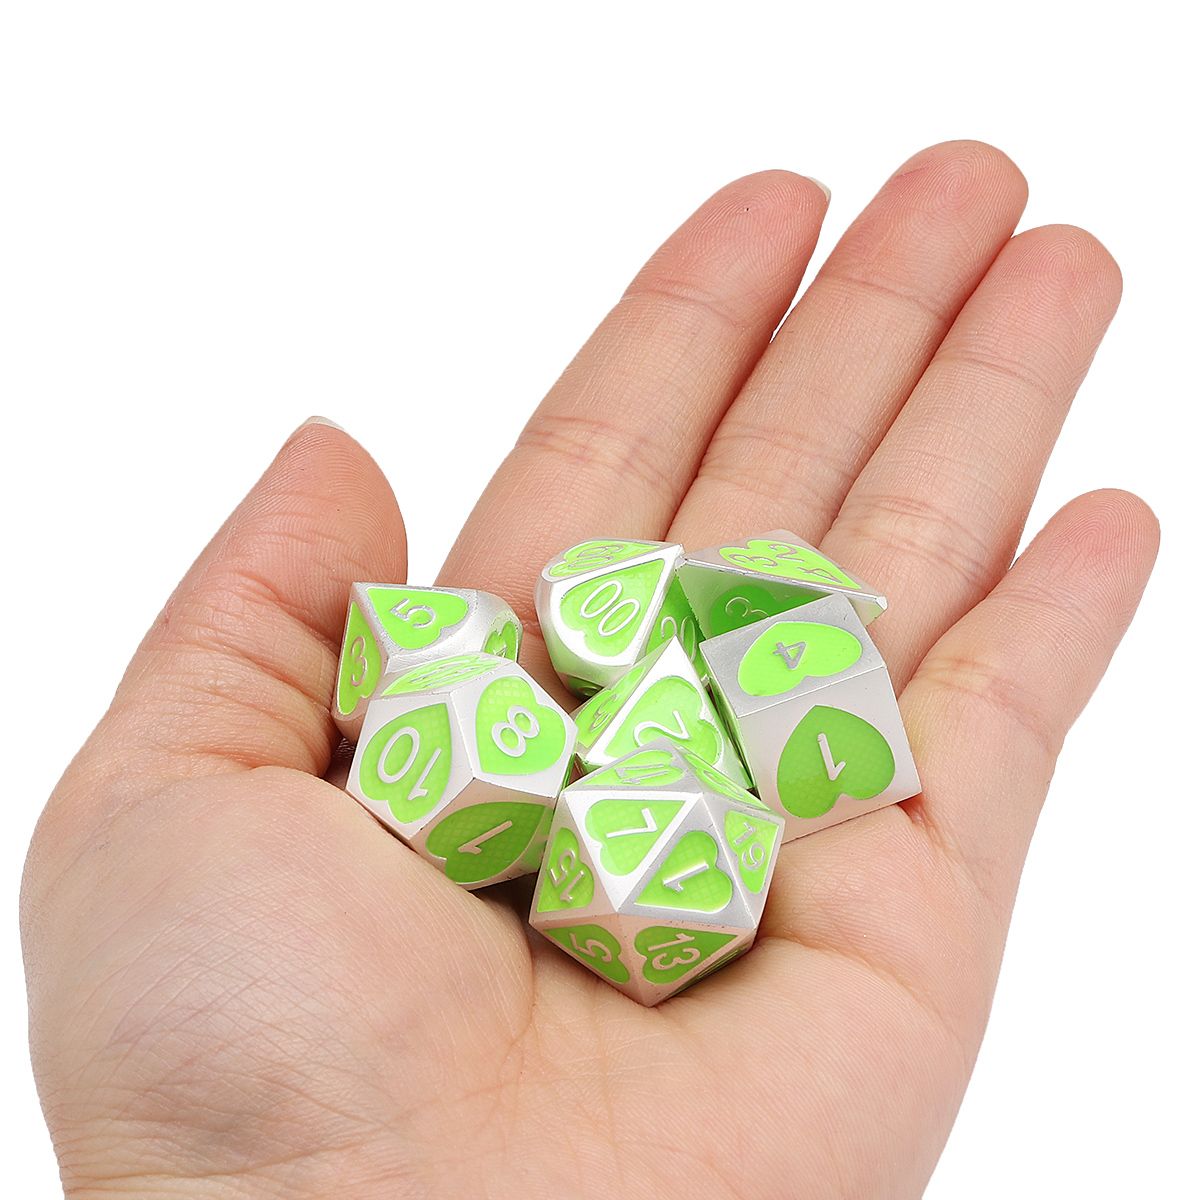 7PcsSet-Zinc-Alloy-Polyhedral-Dices-Role-Playing-Games-Accessories-DND-Dices-1646833